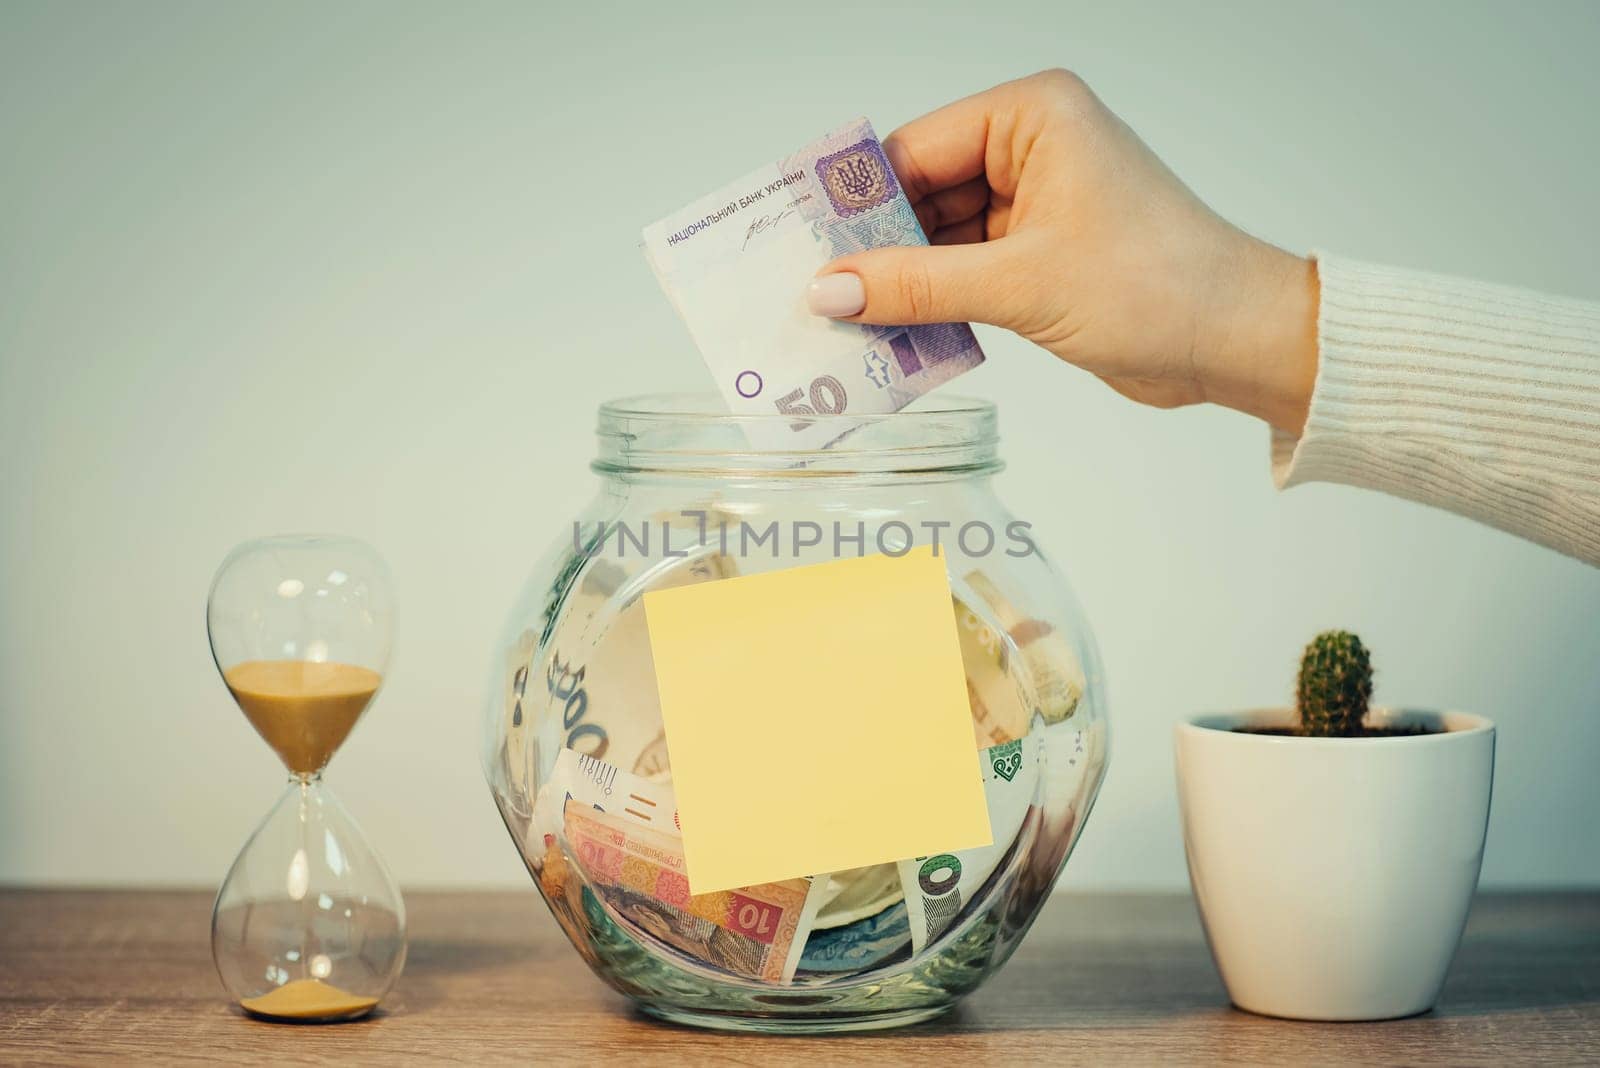 Girl puts 50 hryvnias banknote to the glass jar with blank paper for inscription, toned photo